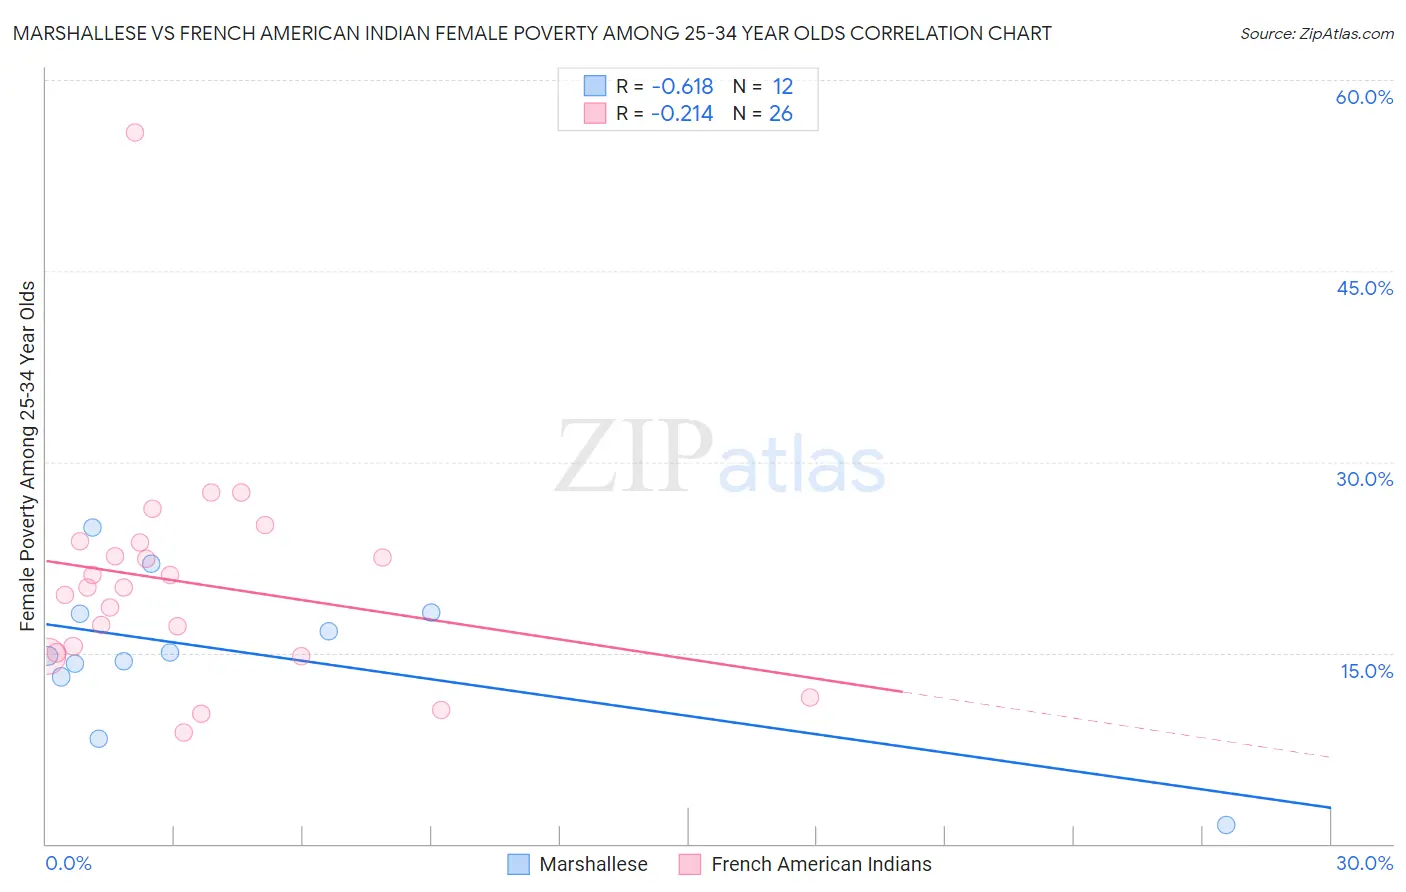 Marshallese vs French American Indian Female Poverty Among 25-34 Year Olds